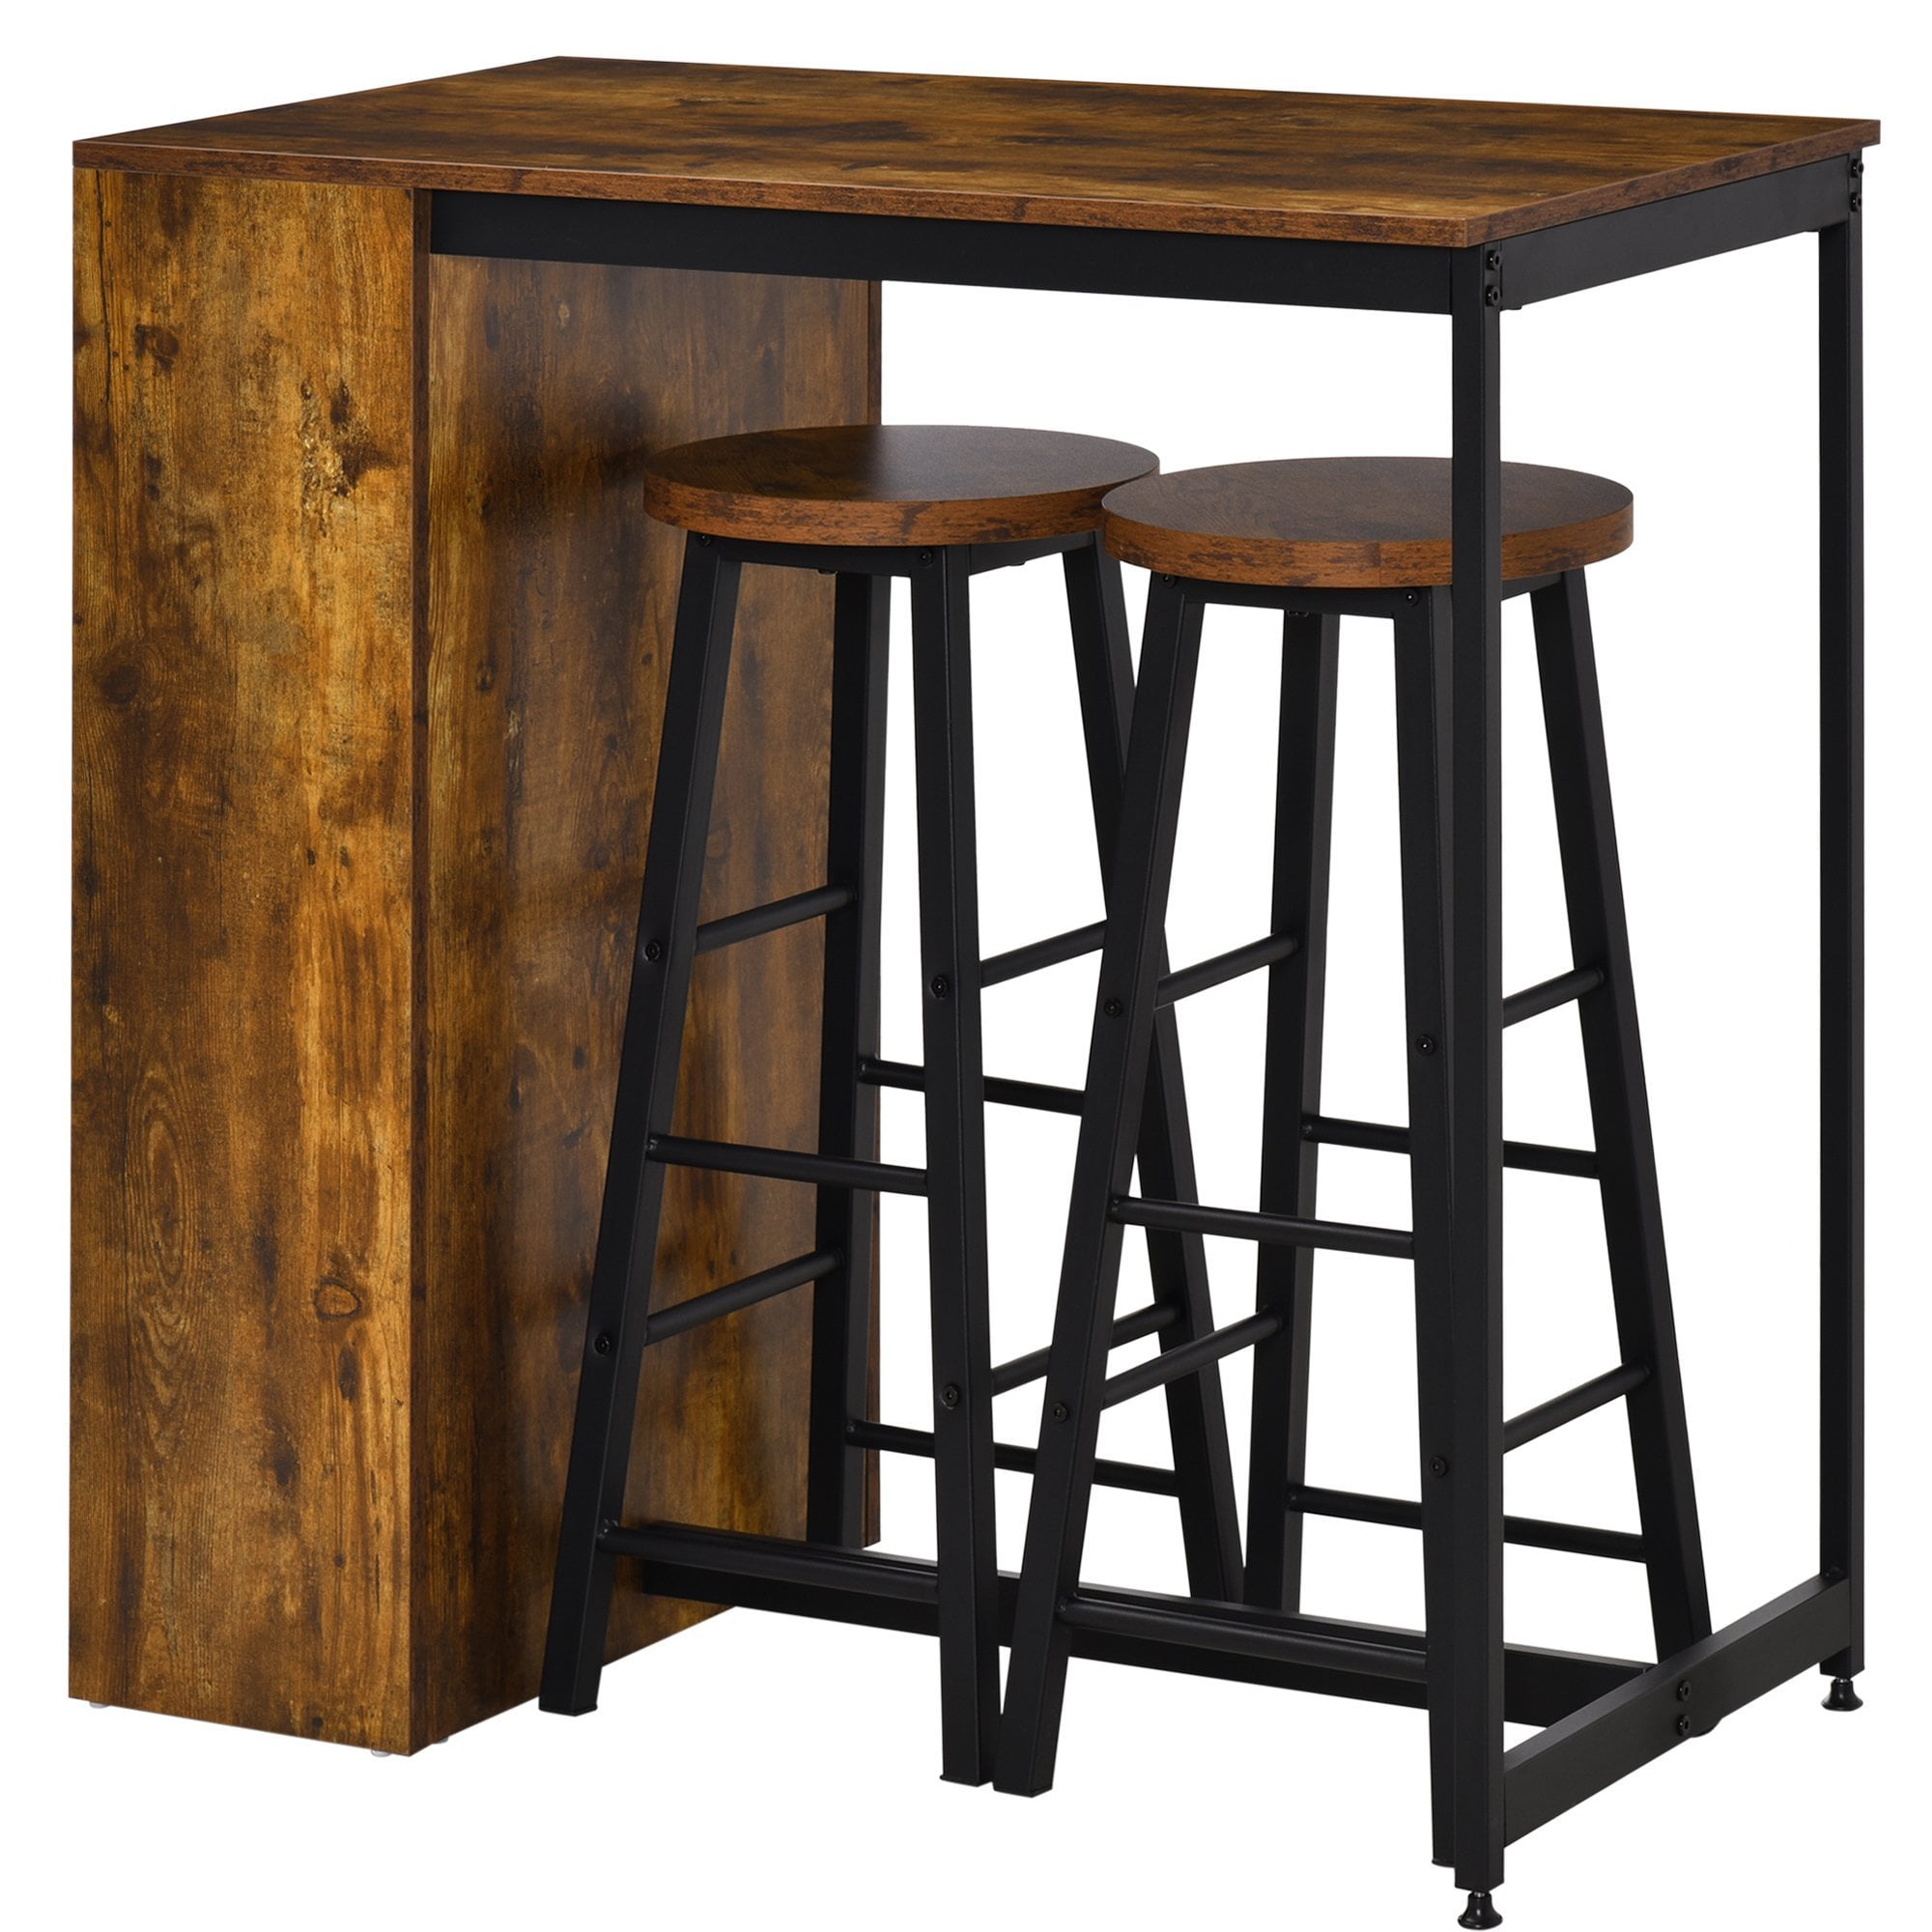 3 Piece Industrial Style Bar Table Set - Table and 2 Stools with Storage Shelf for Kitchen - Living Room - Coffe Shop - Rustic Brown - Home Living  |